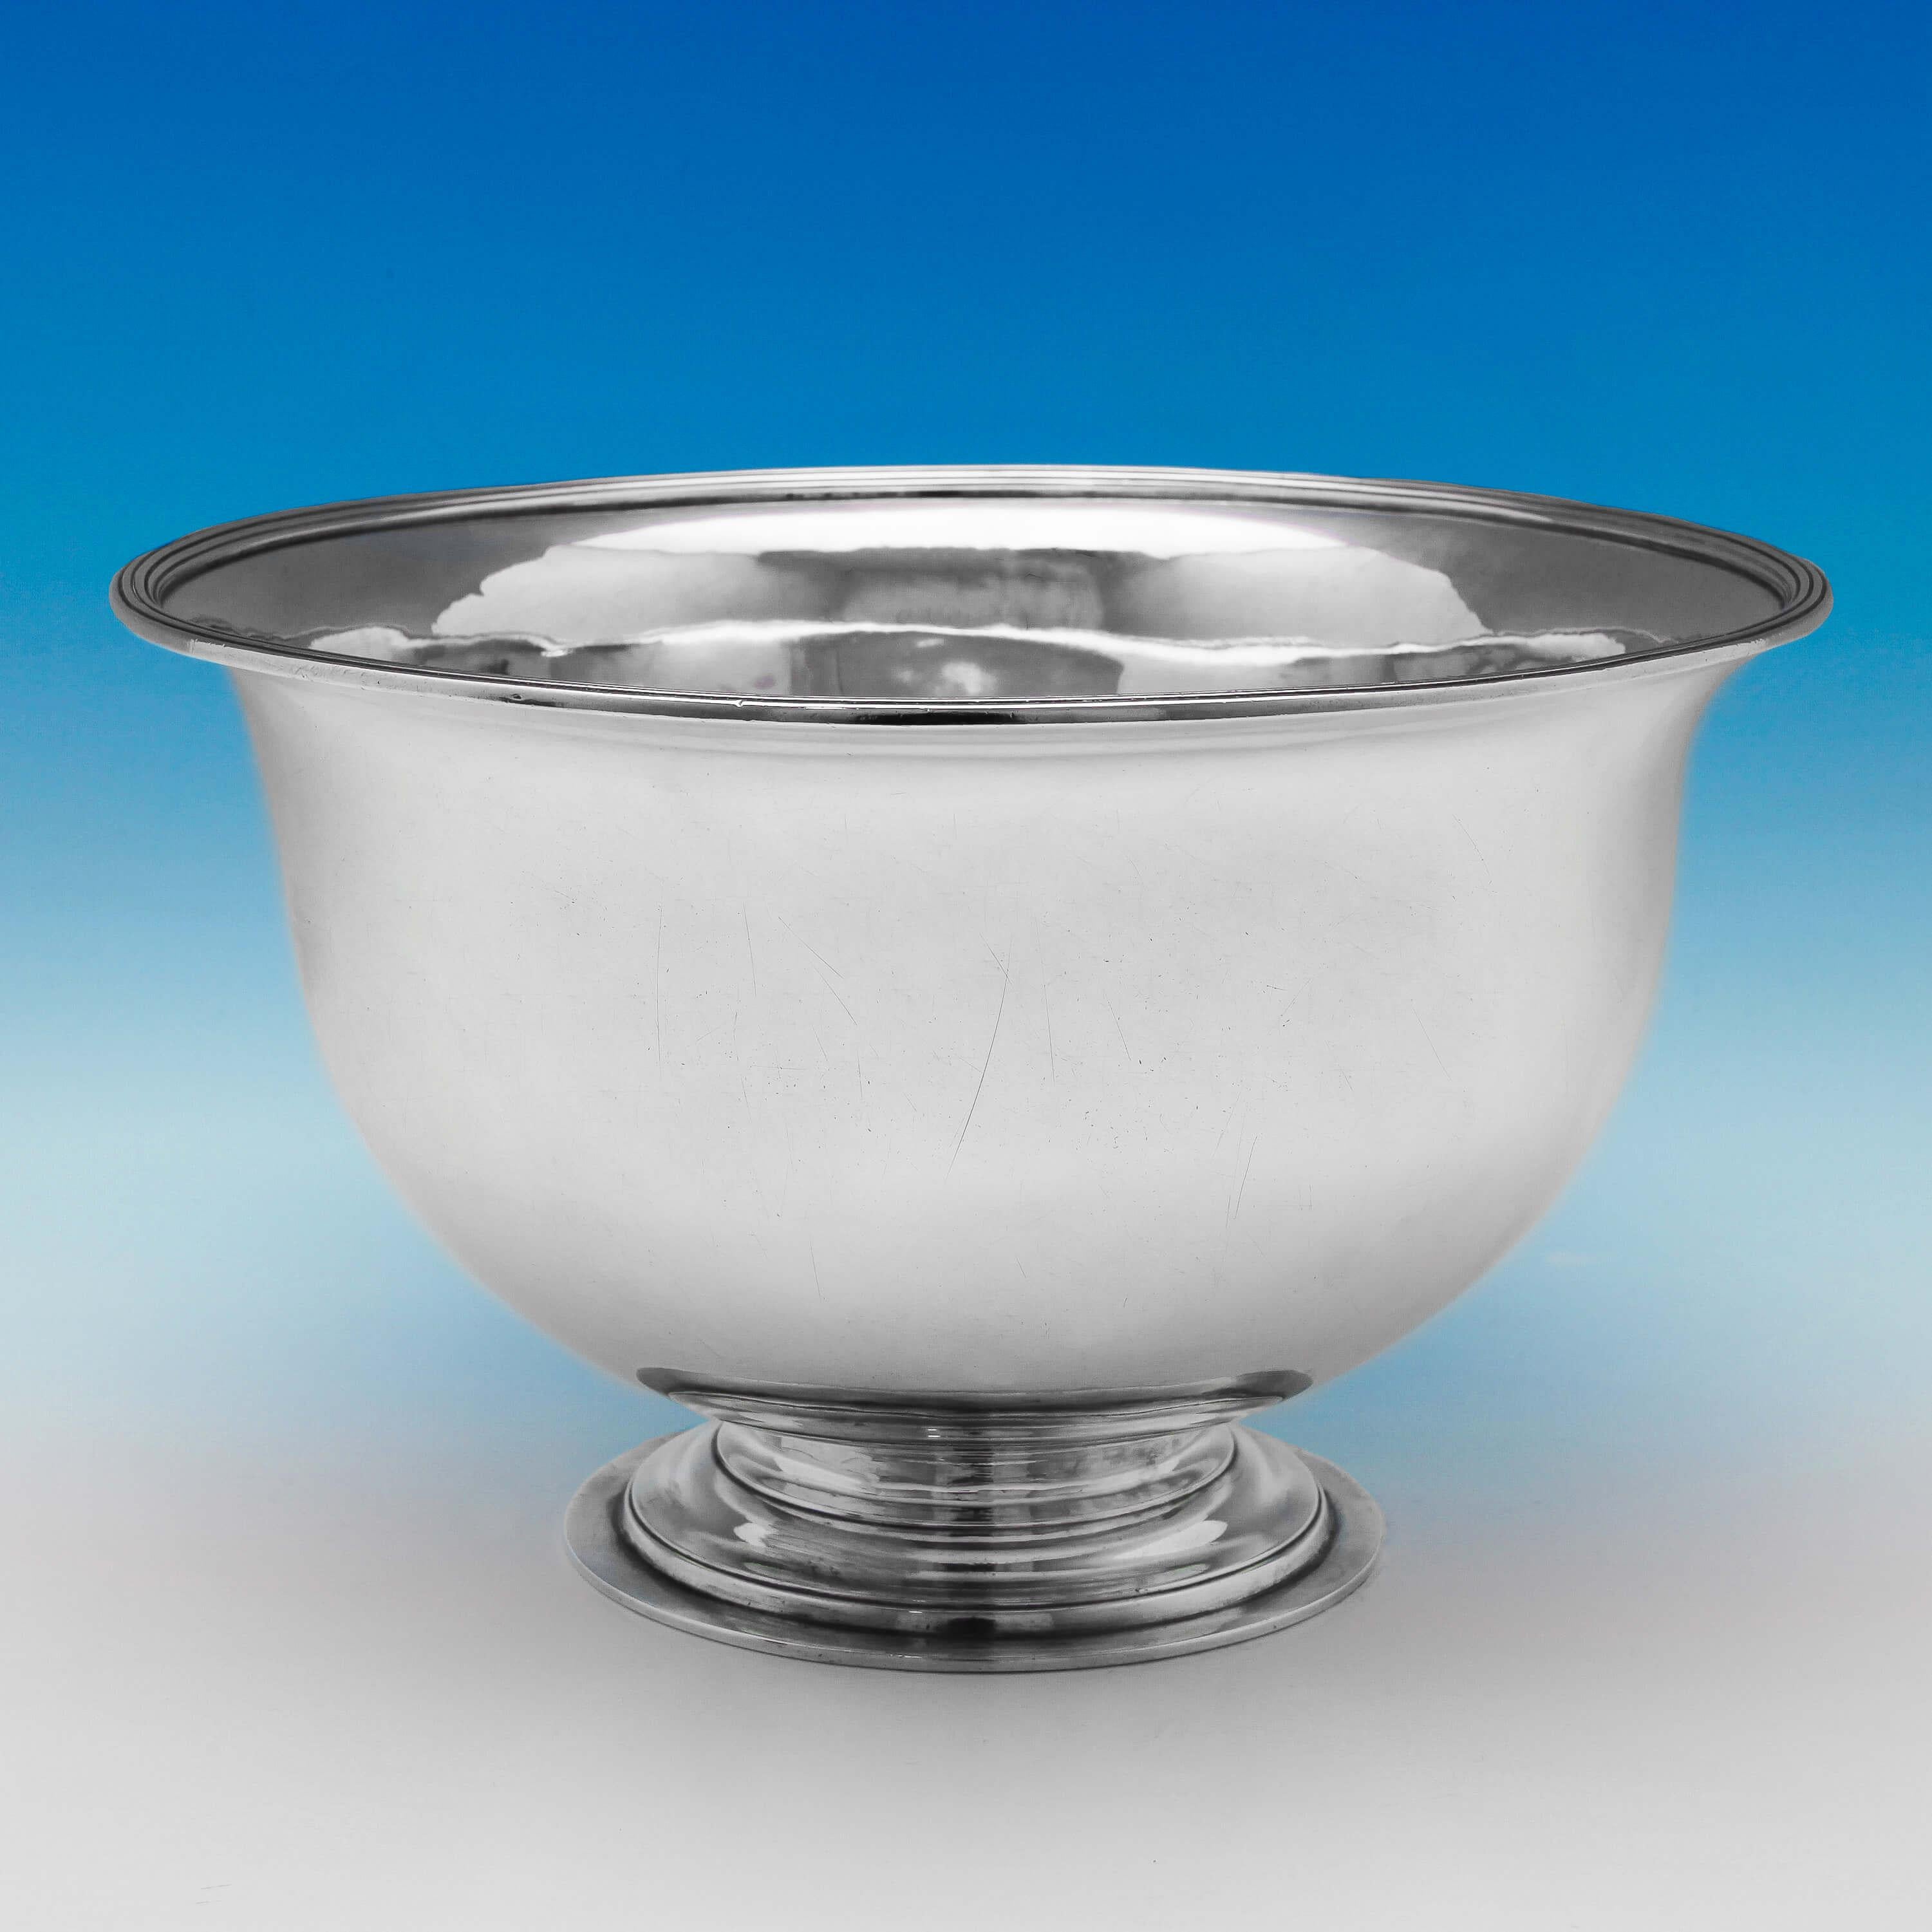 Hallmarked in London in 1798 by Paul Storr, this handsome Antique, George III, Sterling Silver Bowl is very plain in style, featuring reed borders and a pedestal foot. The bowl measures 10.5 inches (26.5cm) in diameter, 6.25 inches (16cm) tall and